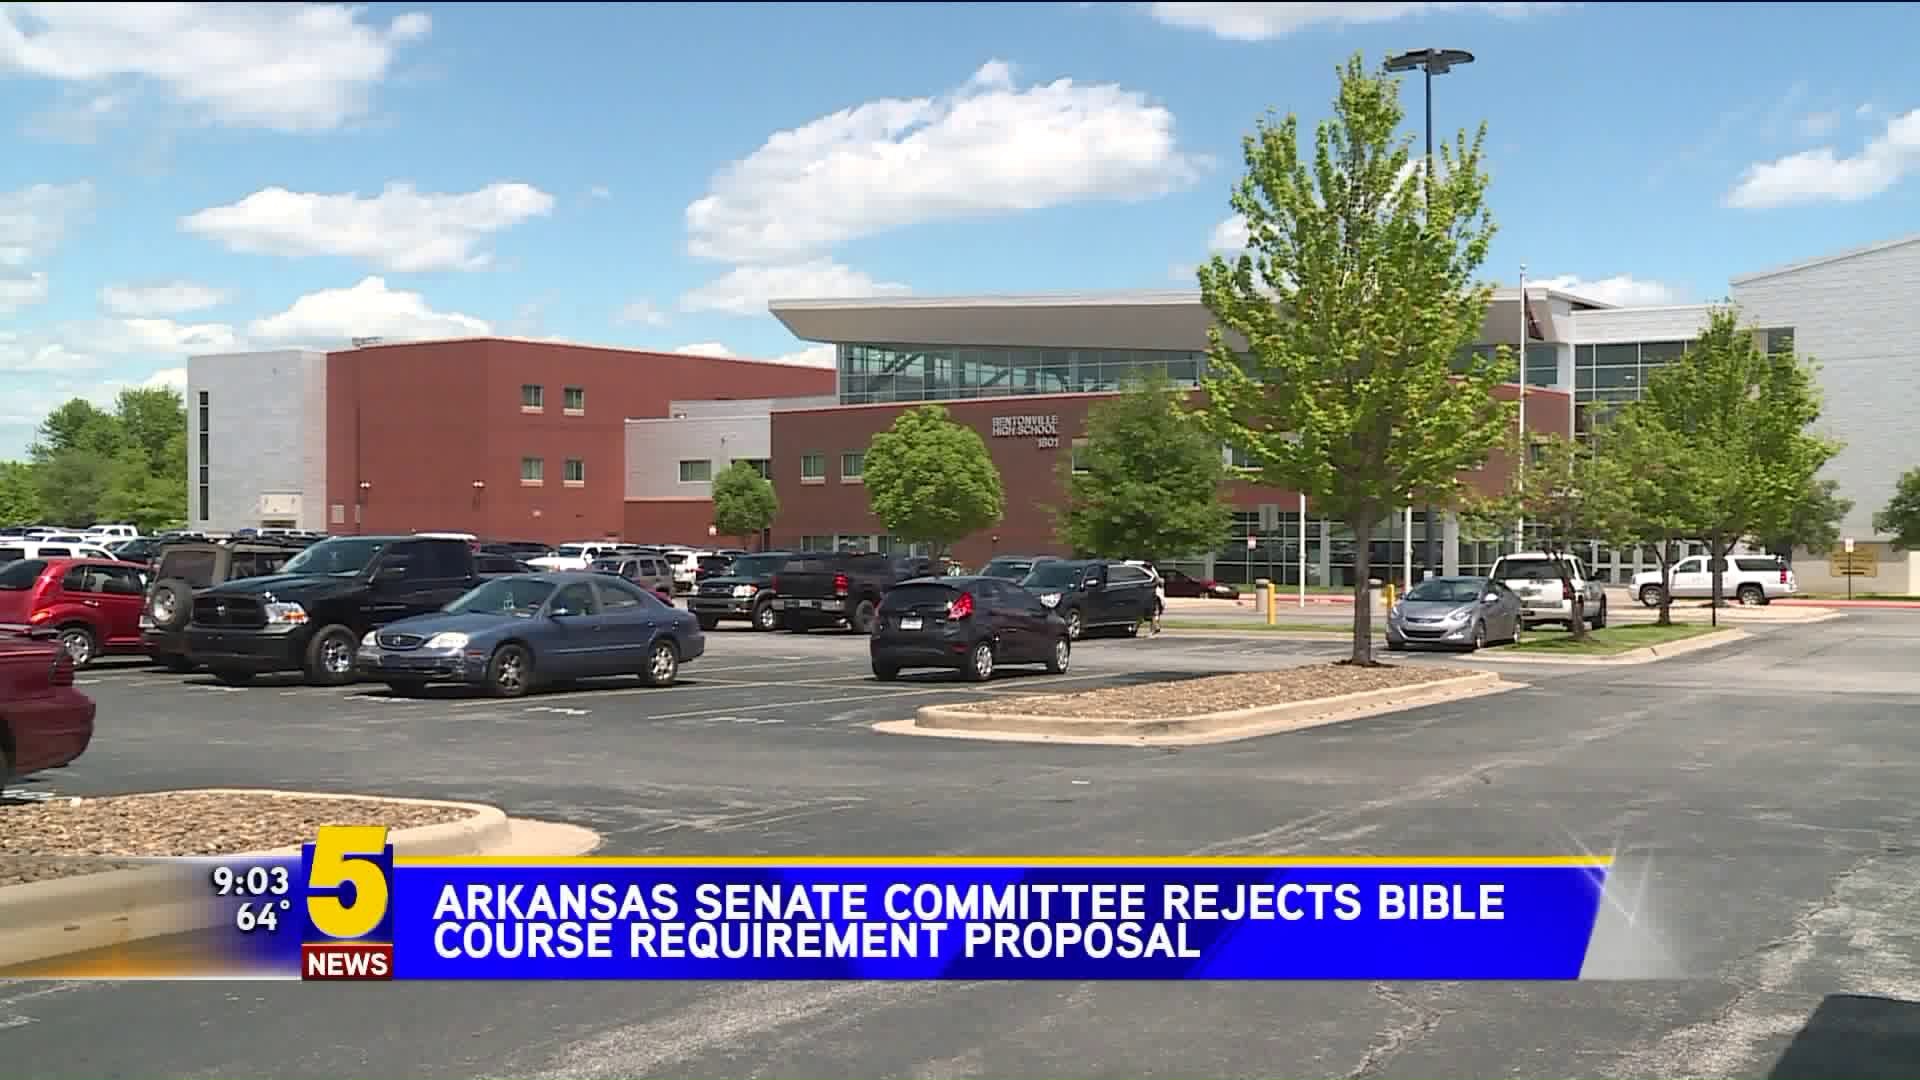 Arkansas Senate Committee Rejects Bible Course Requirement Proposal